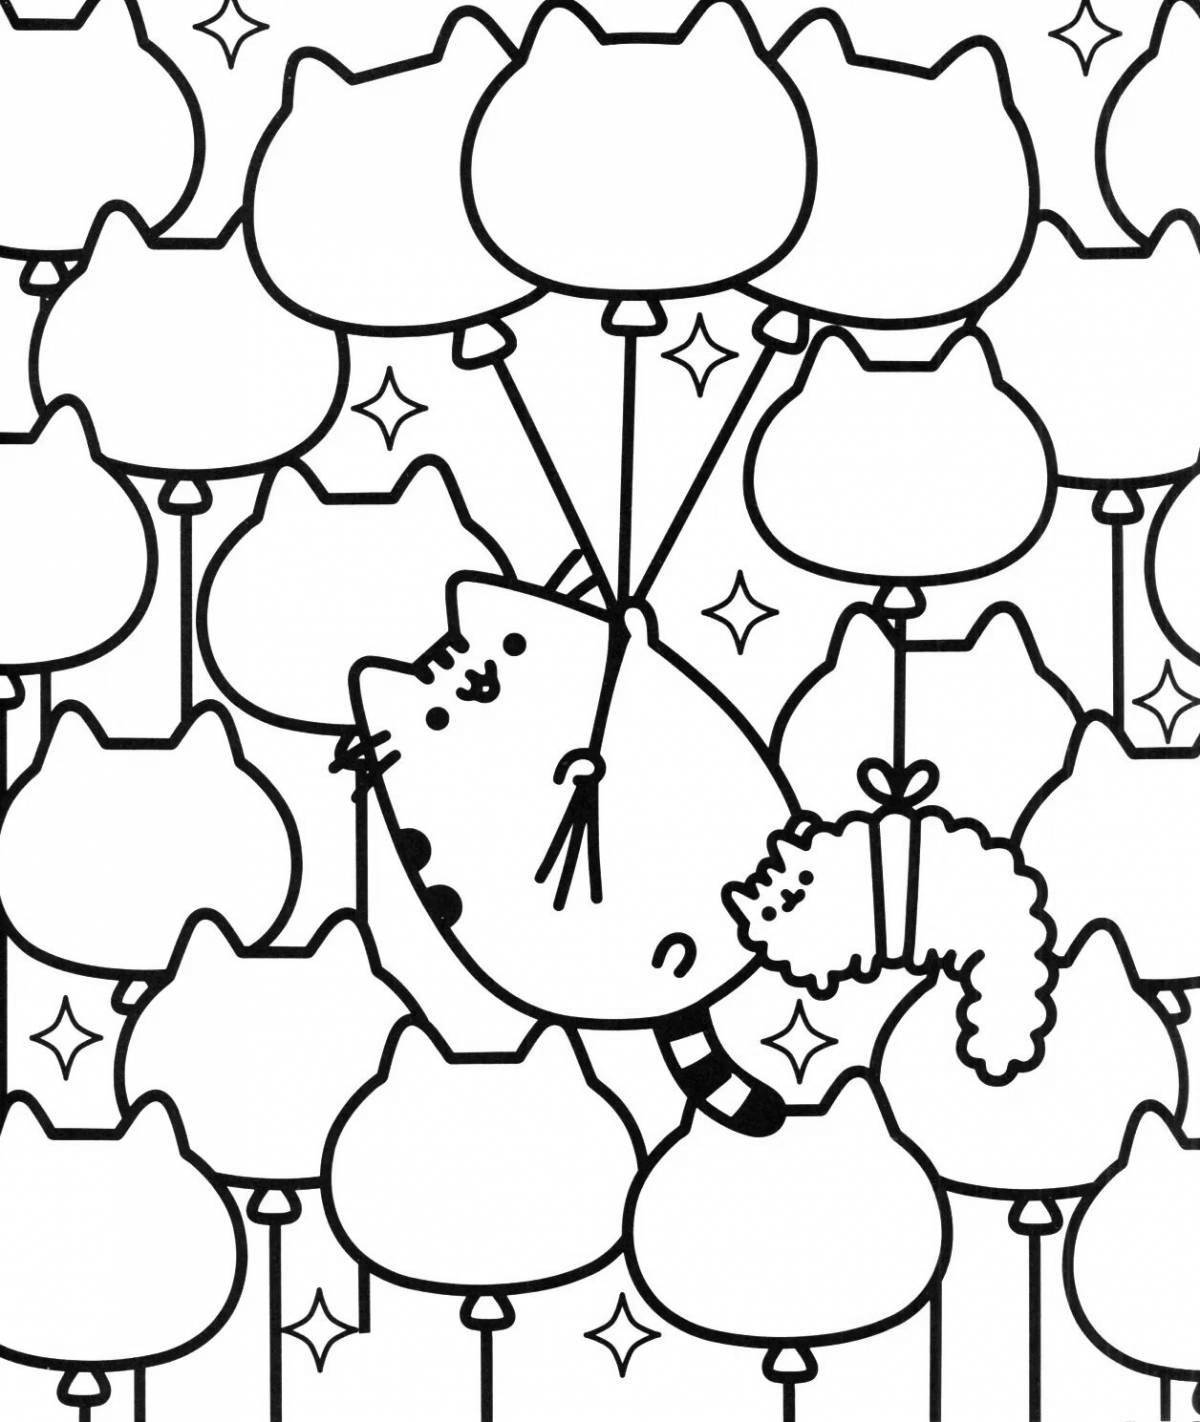 Color-frenetic coloring page много pushins